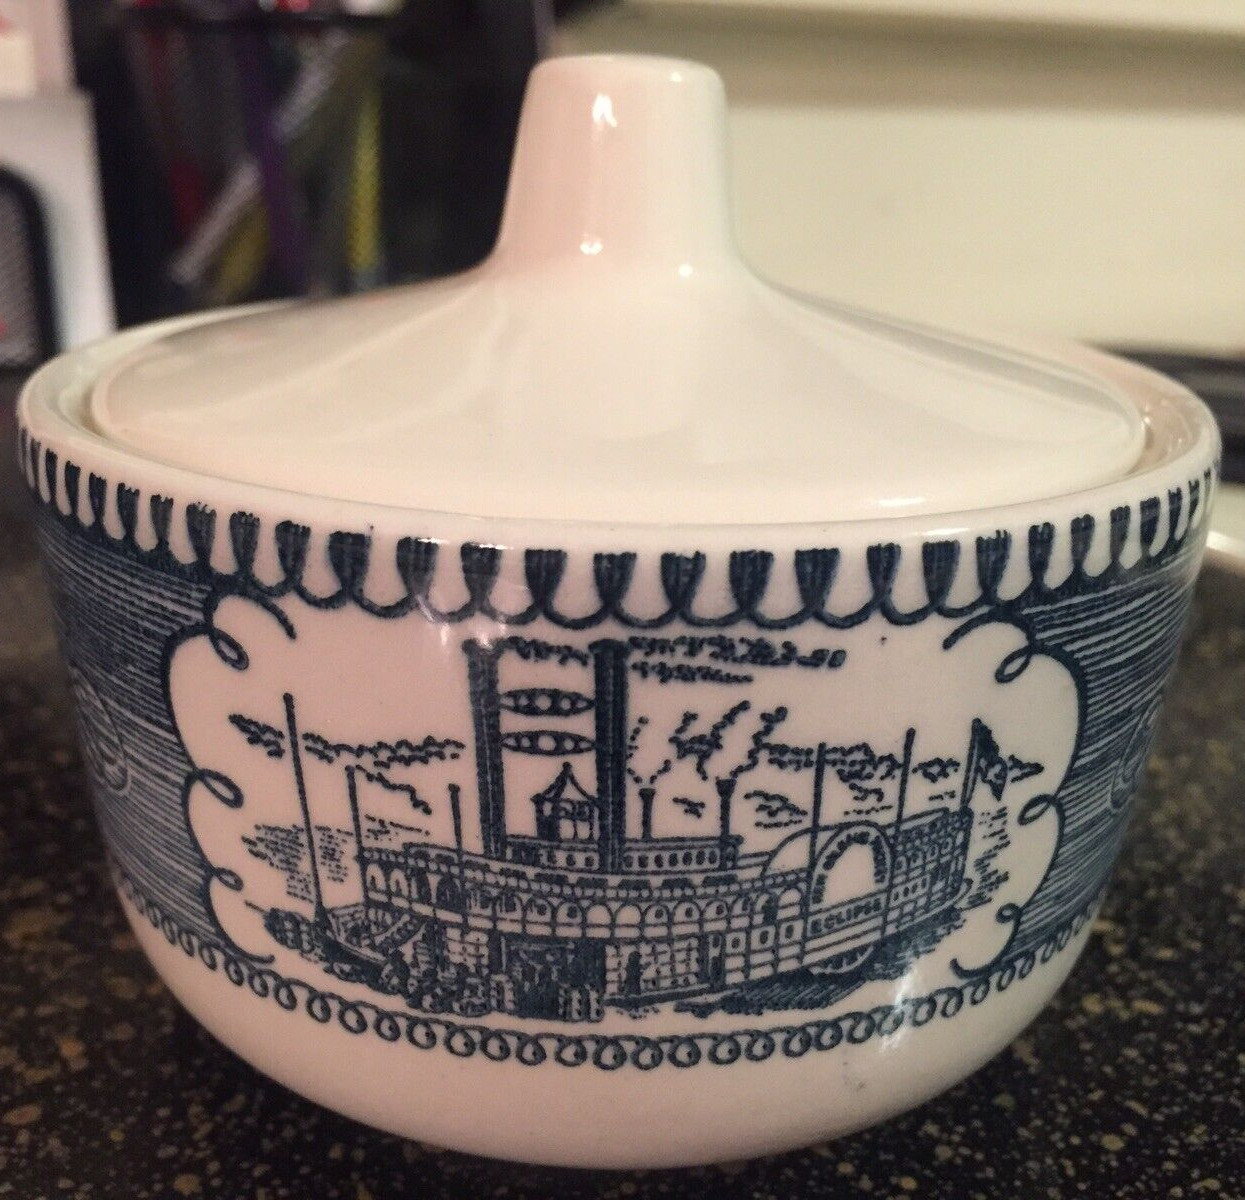 Vintage Currier & Ives Steamboat Royal China Blue White Sugar Bowl with Lid